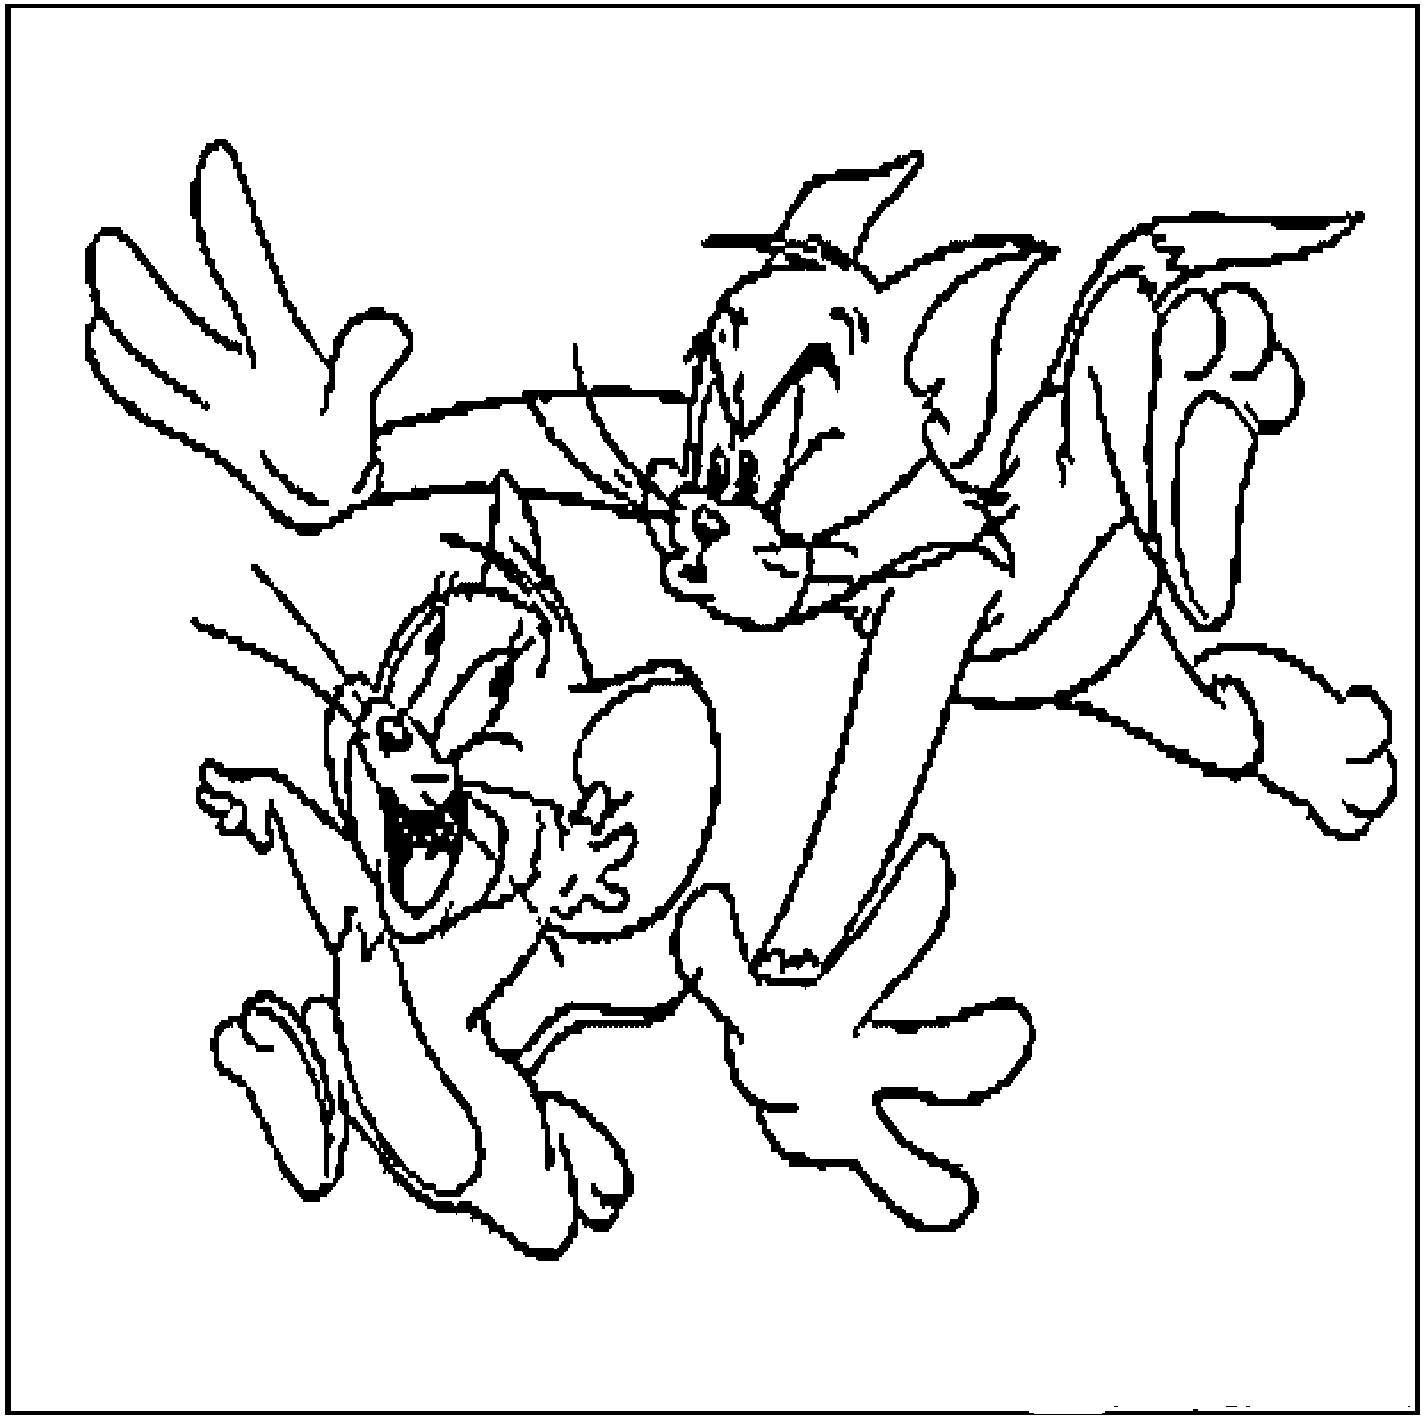 Tom and Jerry Layout Drawing - ID:octtomjerry0376 | Van Eaton Galleries